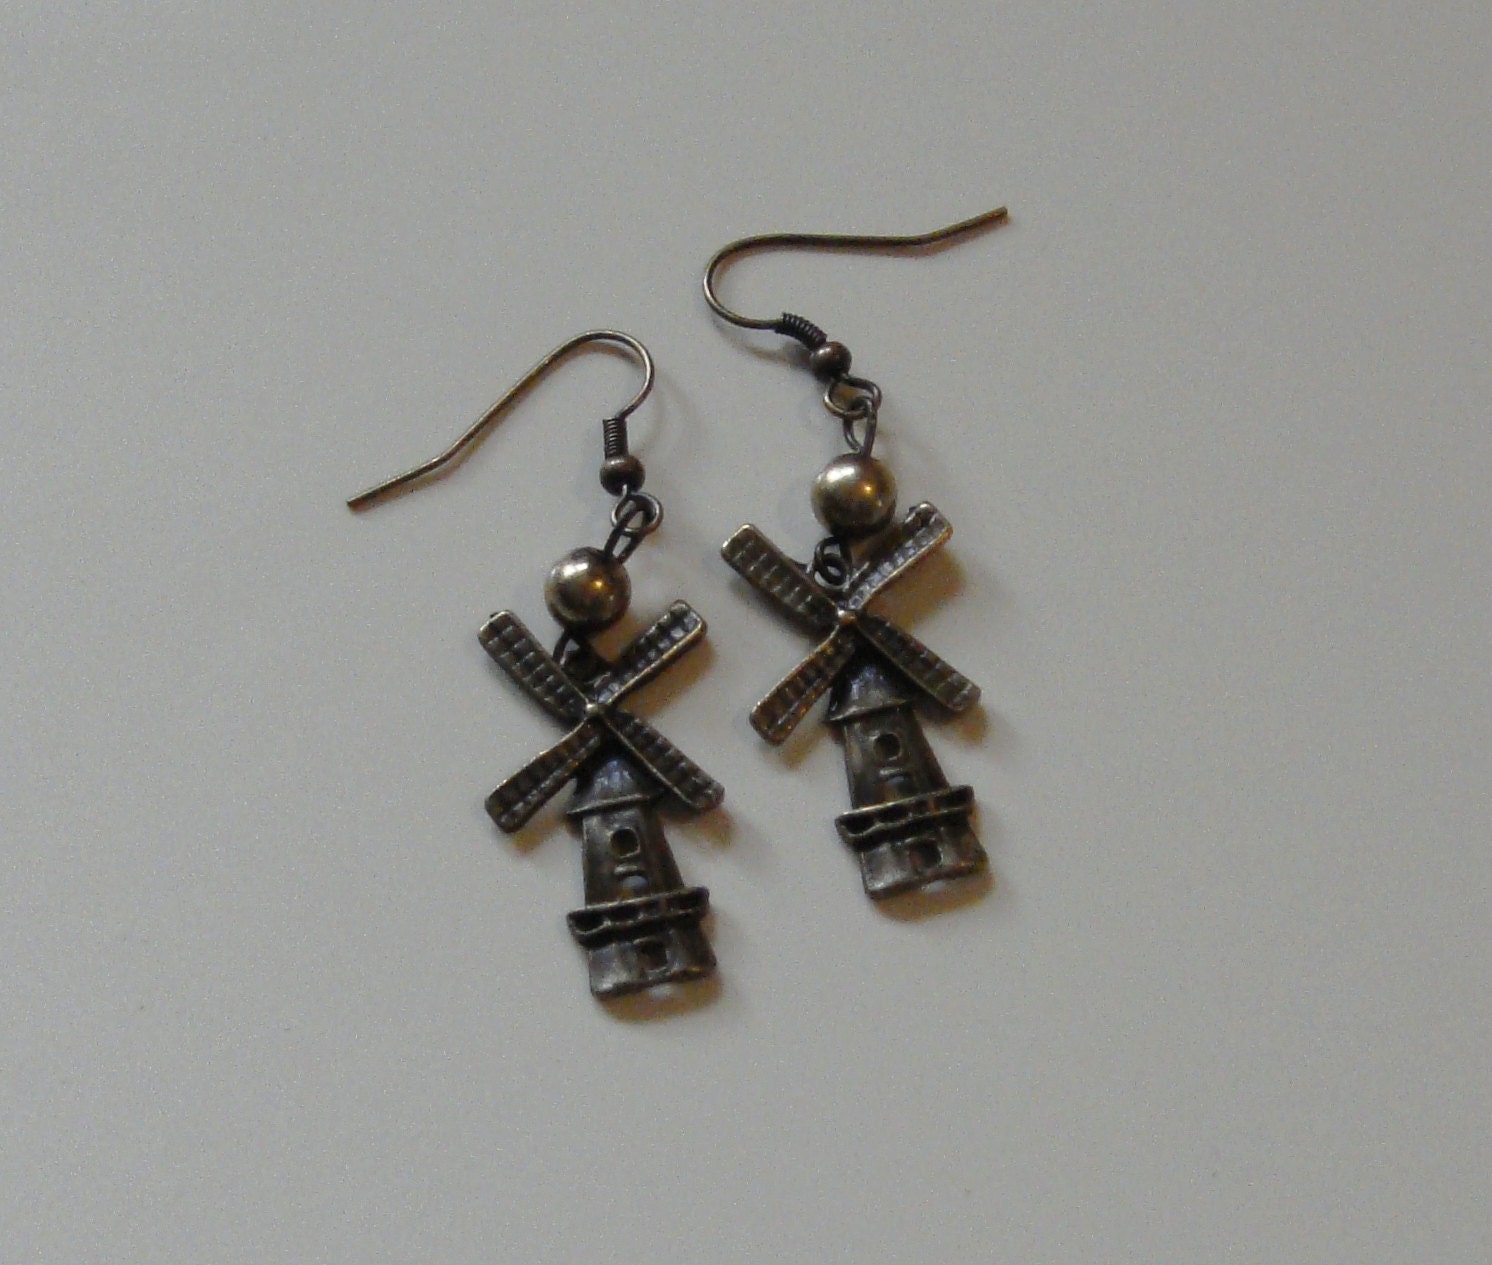 Antique style windmill charm earrings with brass-tone connectors